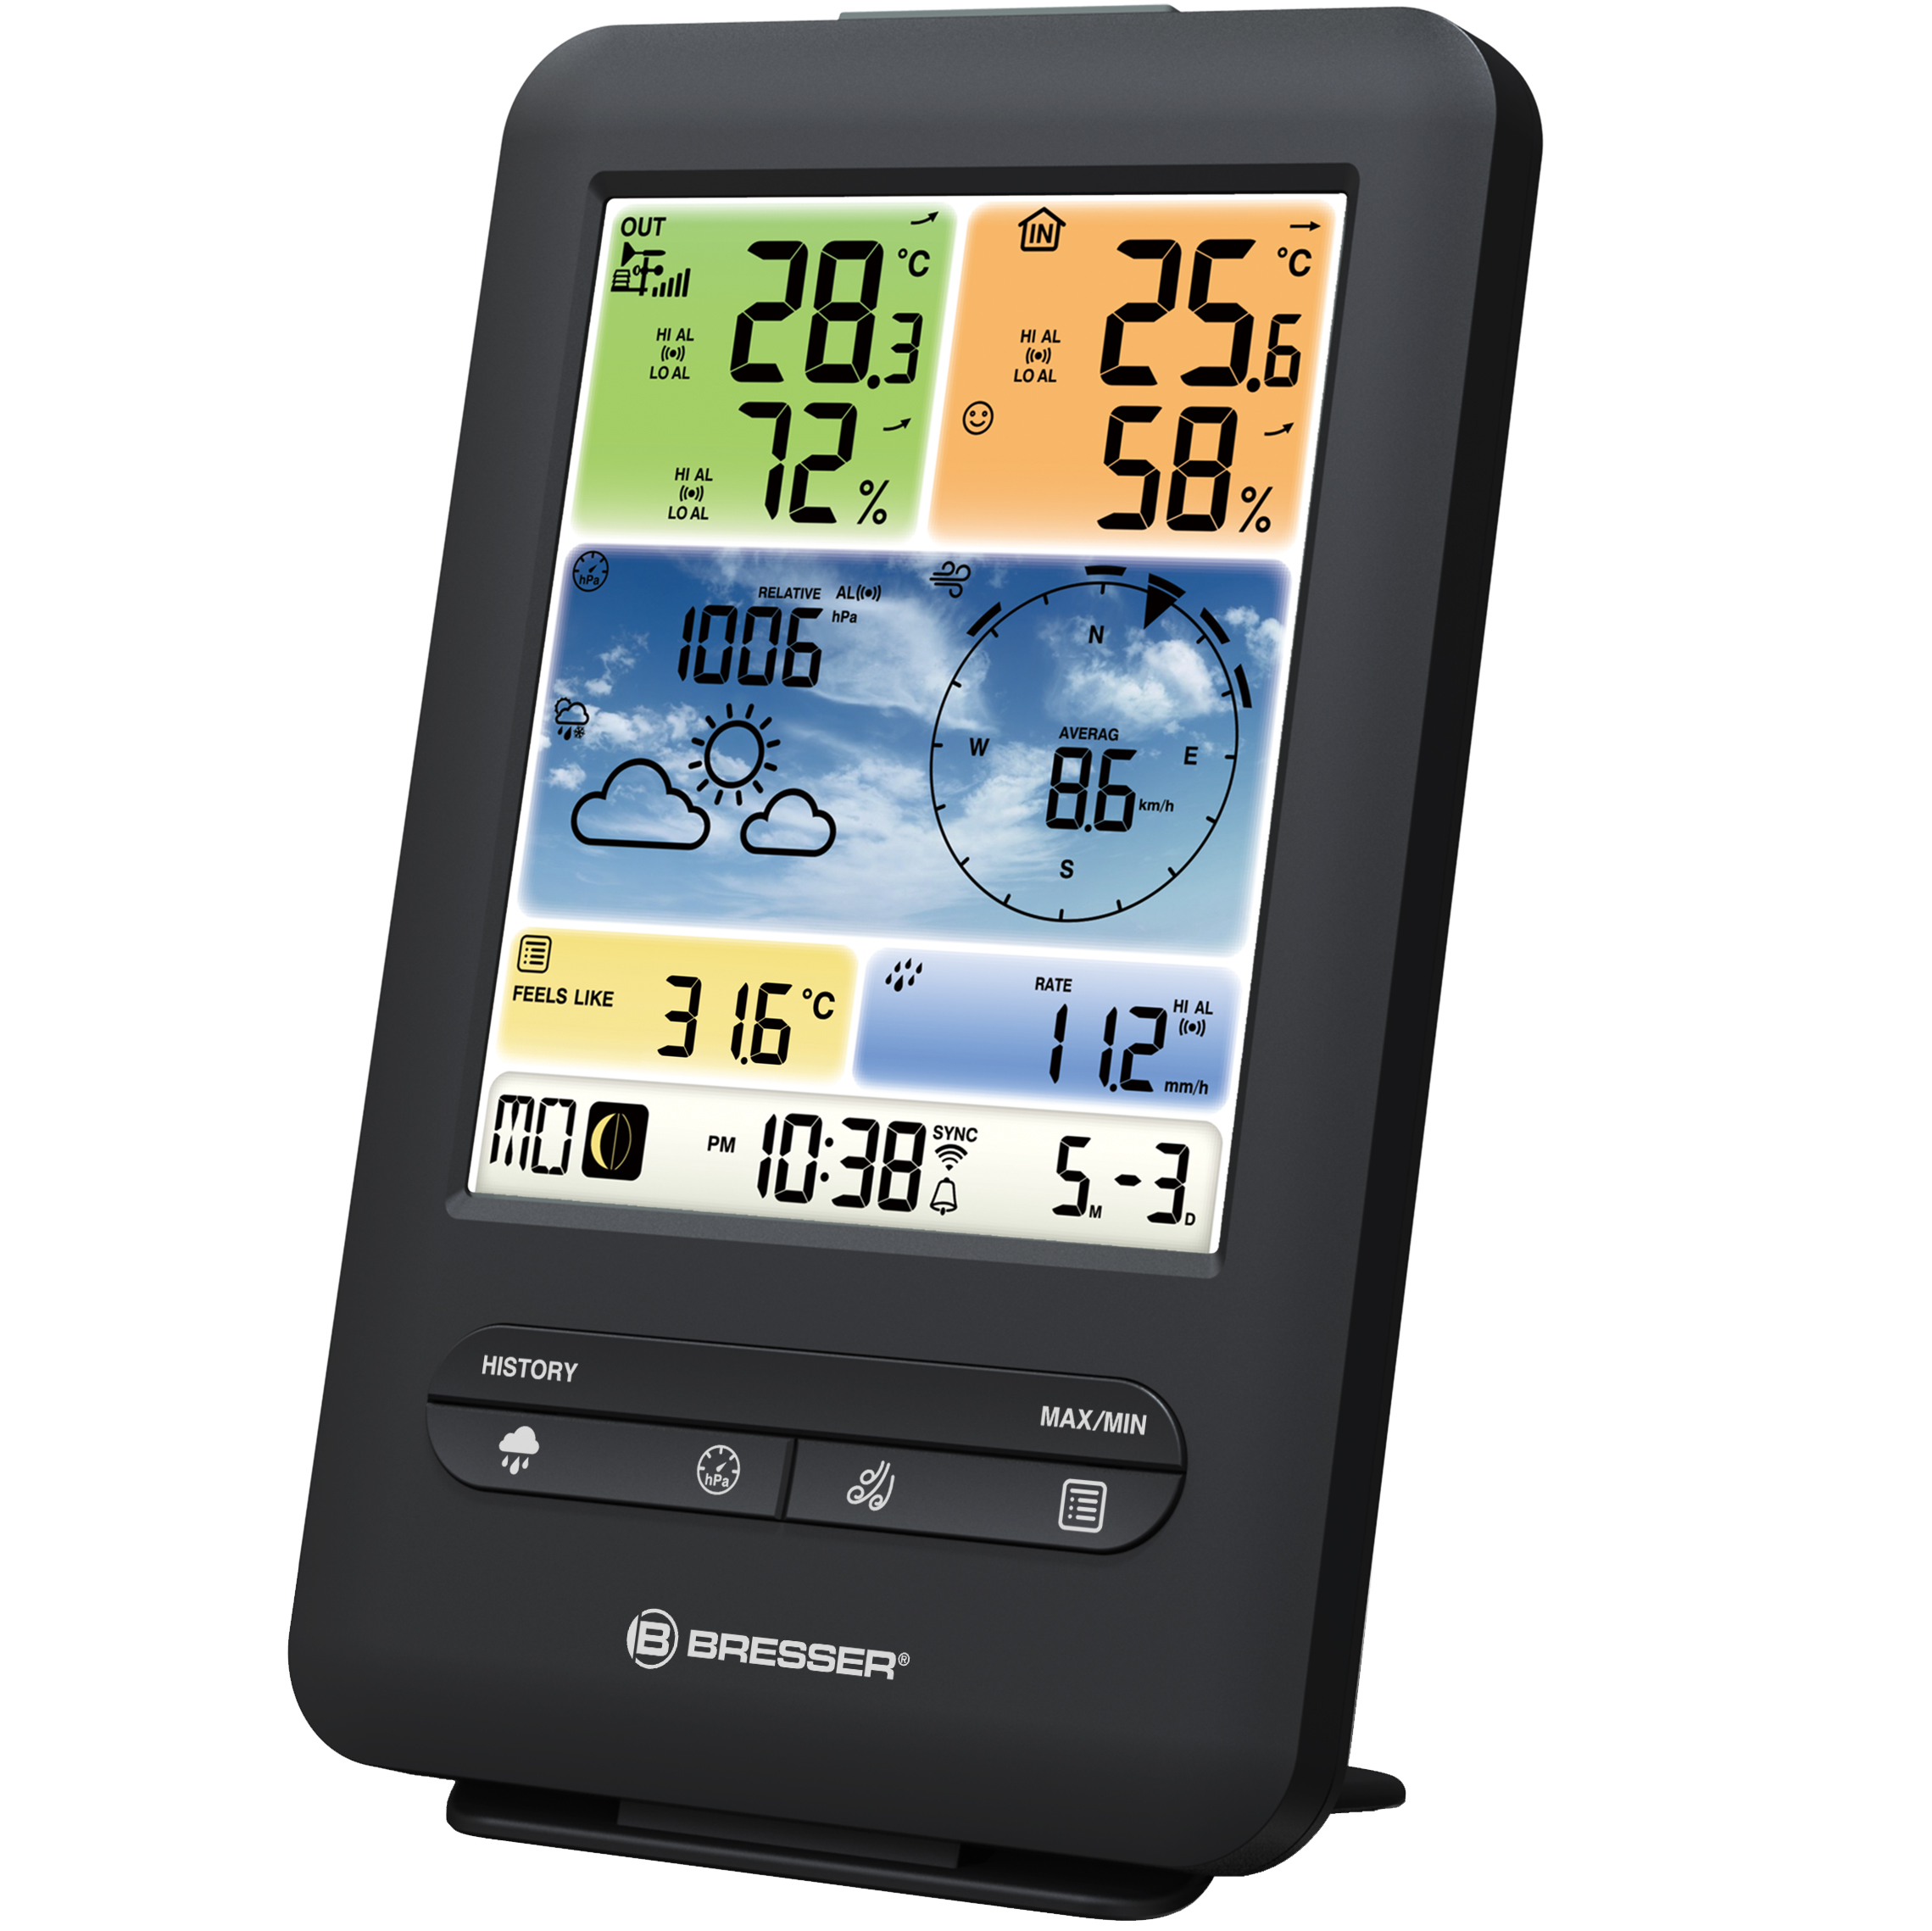 BRESSER Professional Wi-Fi Colour Weather Station 5-in-1 V